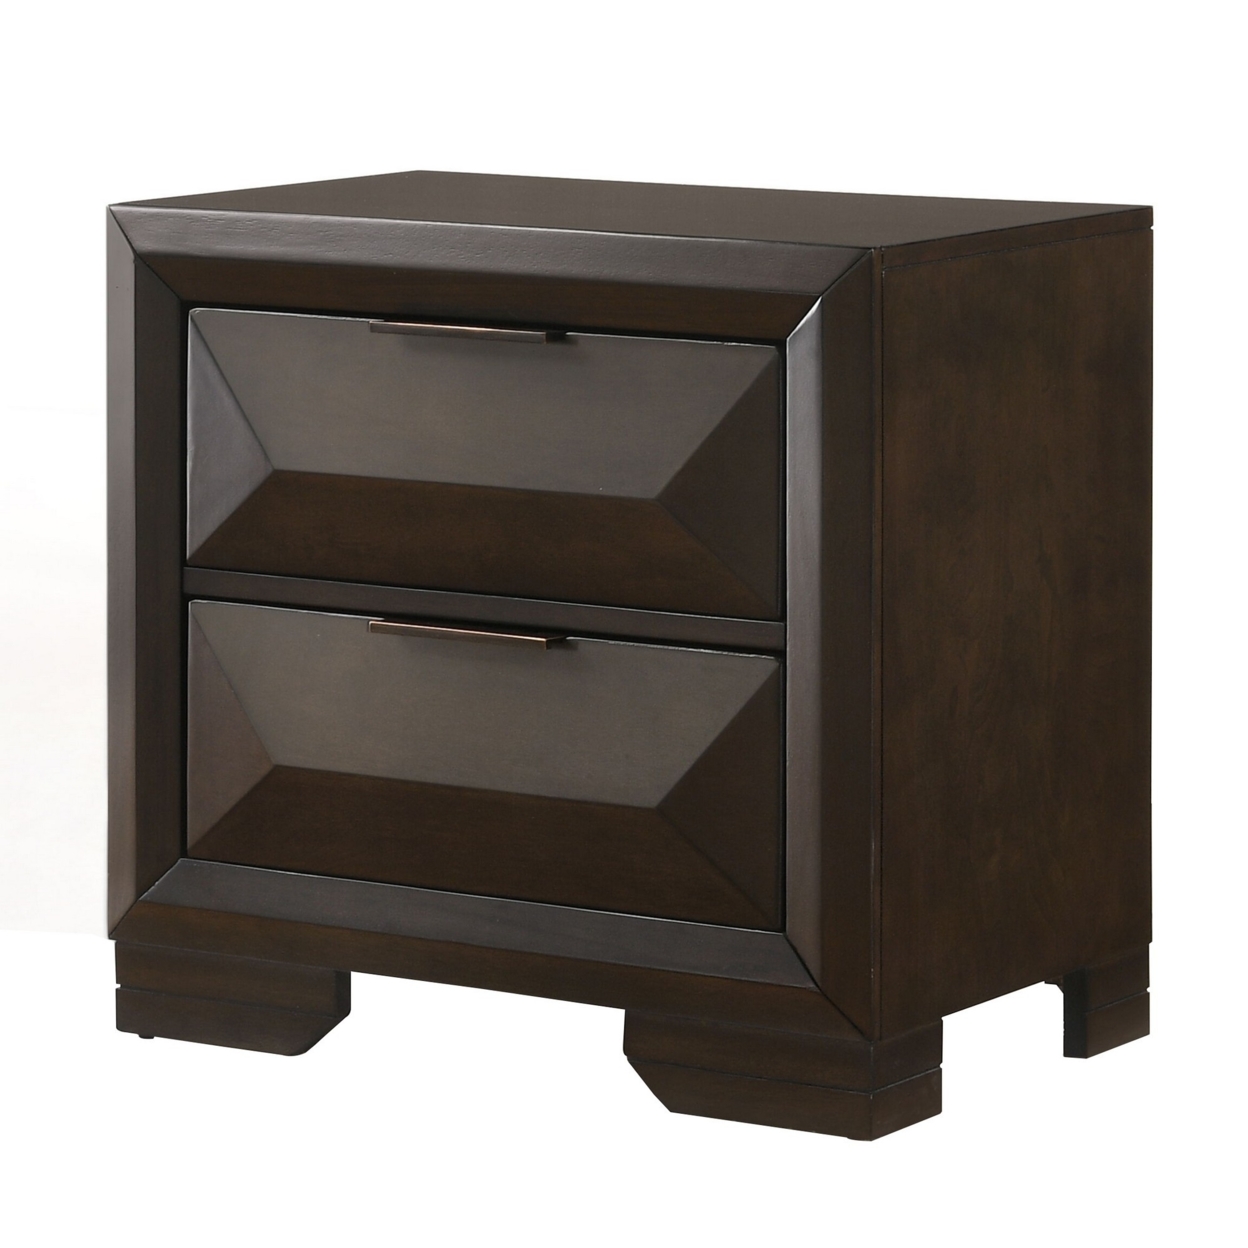 Wooden Nightstand With Dramatic Bevel Drawer Fronts, Espresso Brown- Saltoro Sherpi